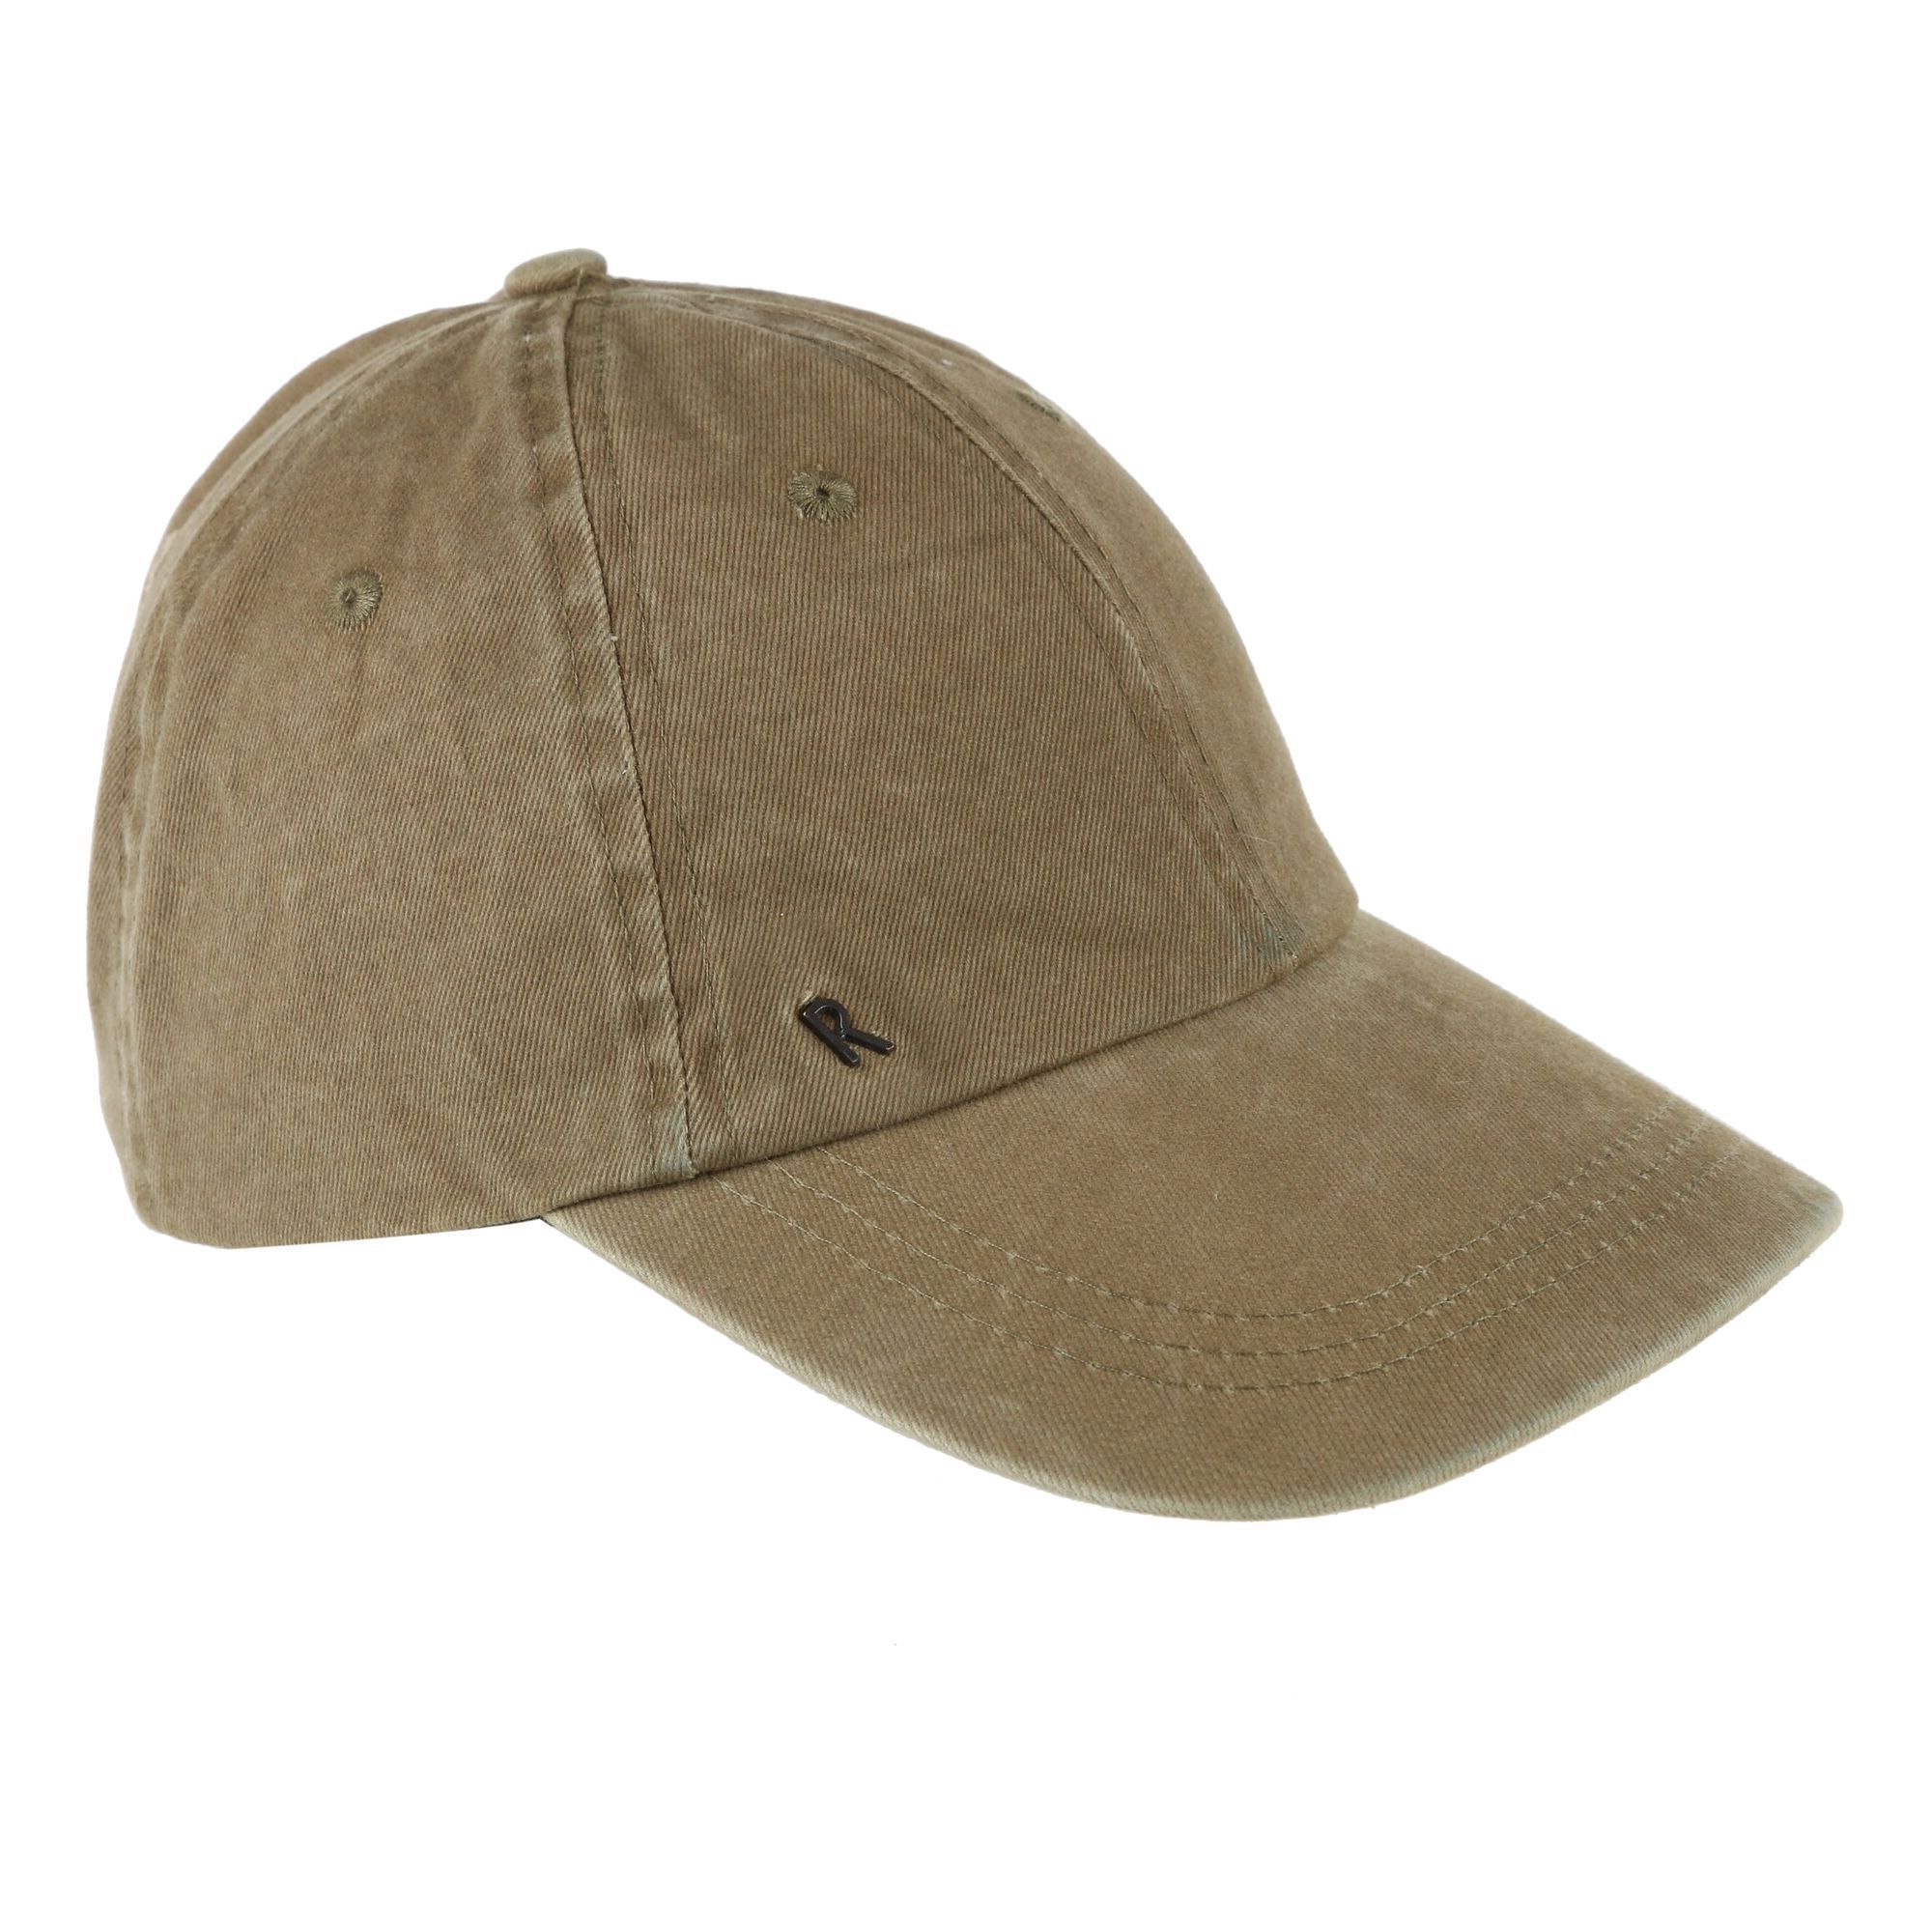 Material: 100% Cotton. 5-panel baseball cap with embroidered eyelets. Adjustable fastening at the back.